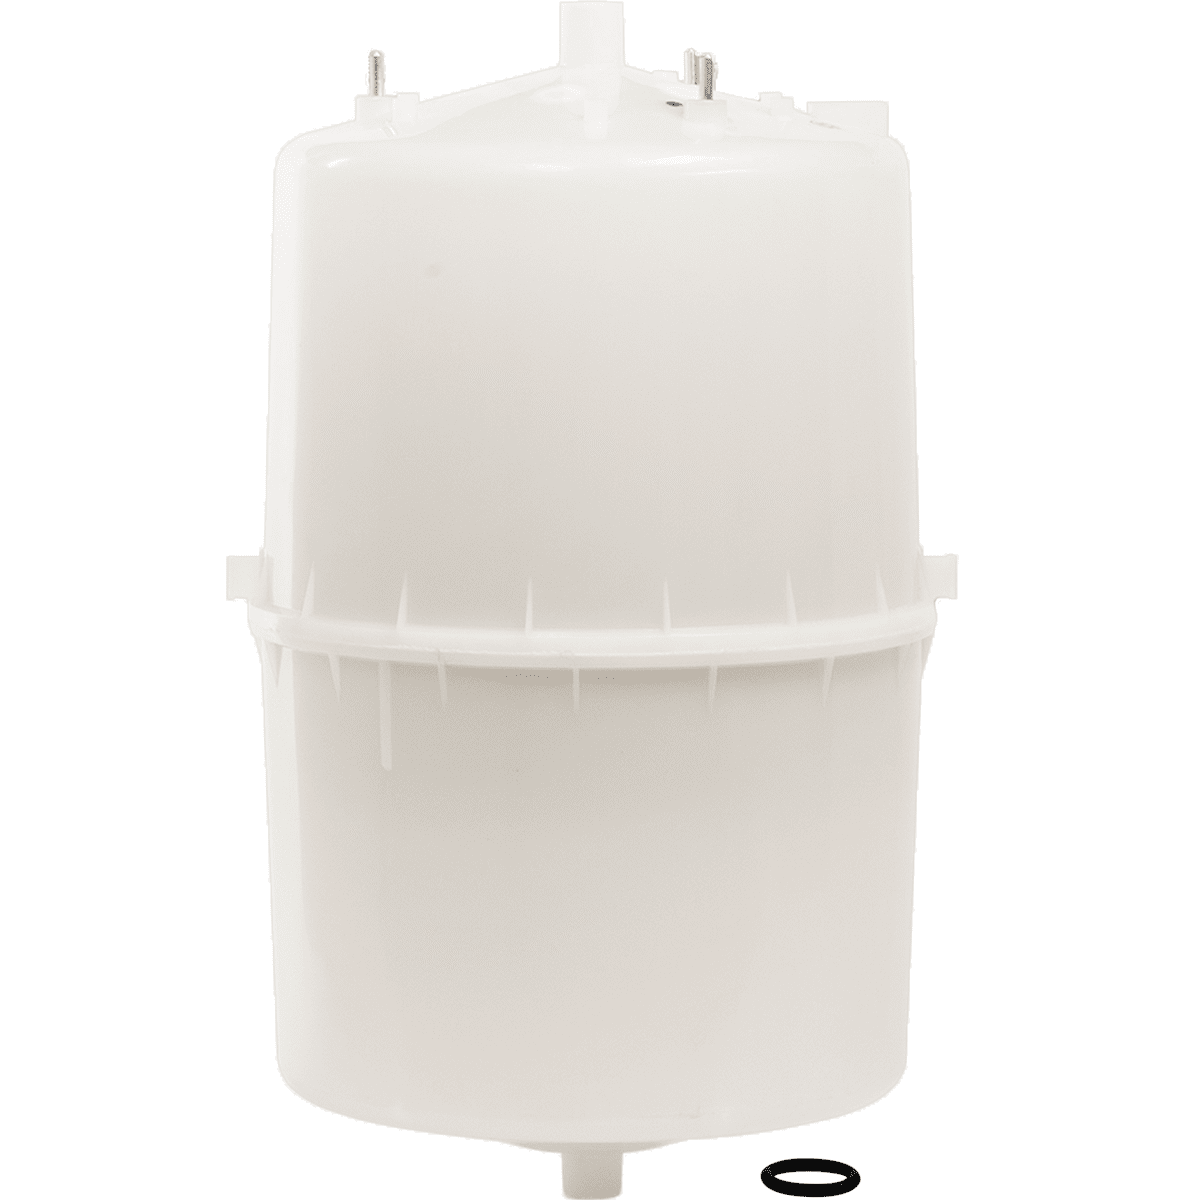 Aprilaire 411a Steam Humidifier Cylinder (fits Nortec® 411)